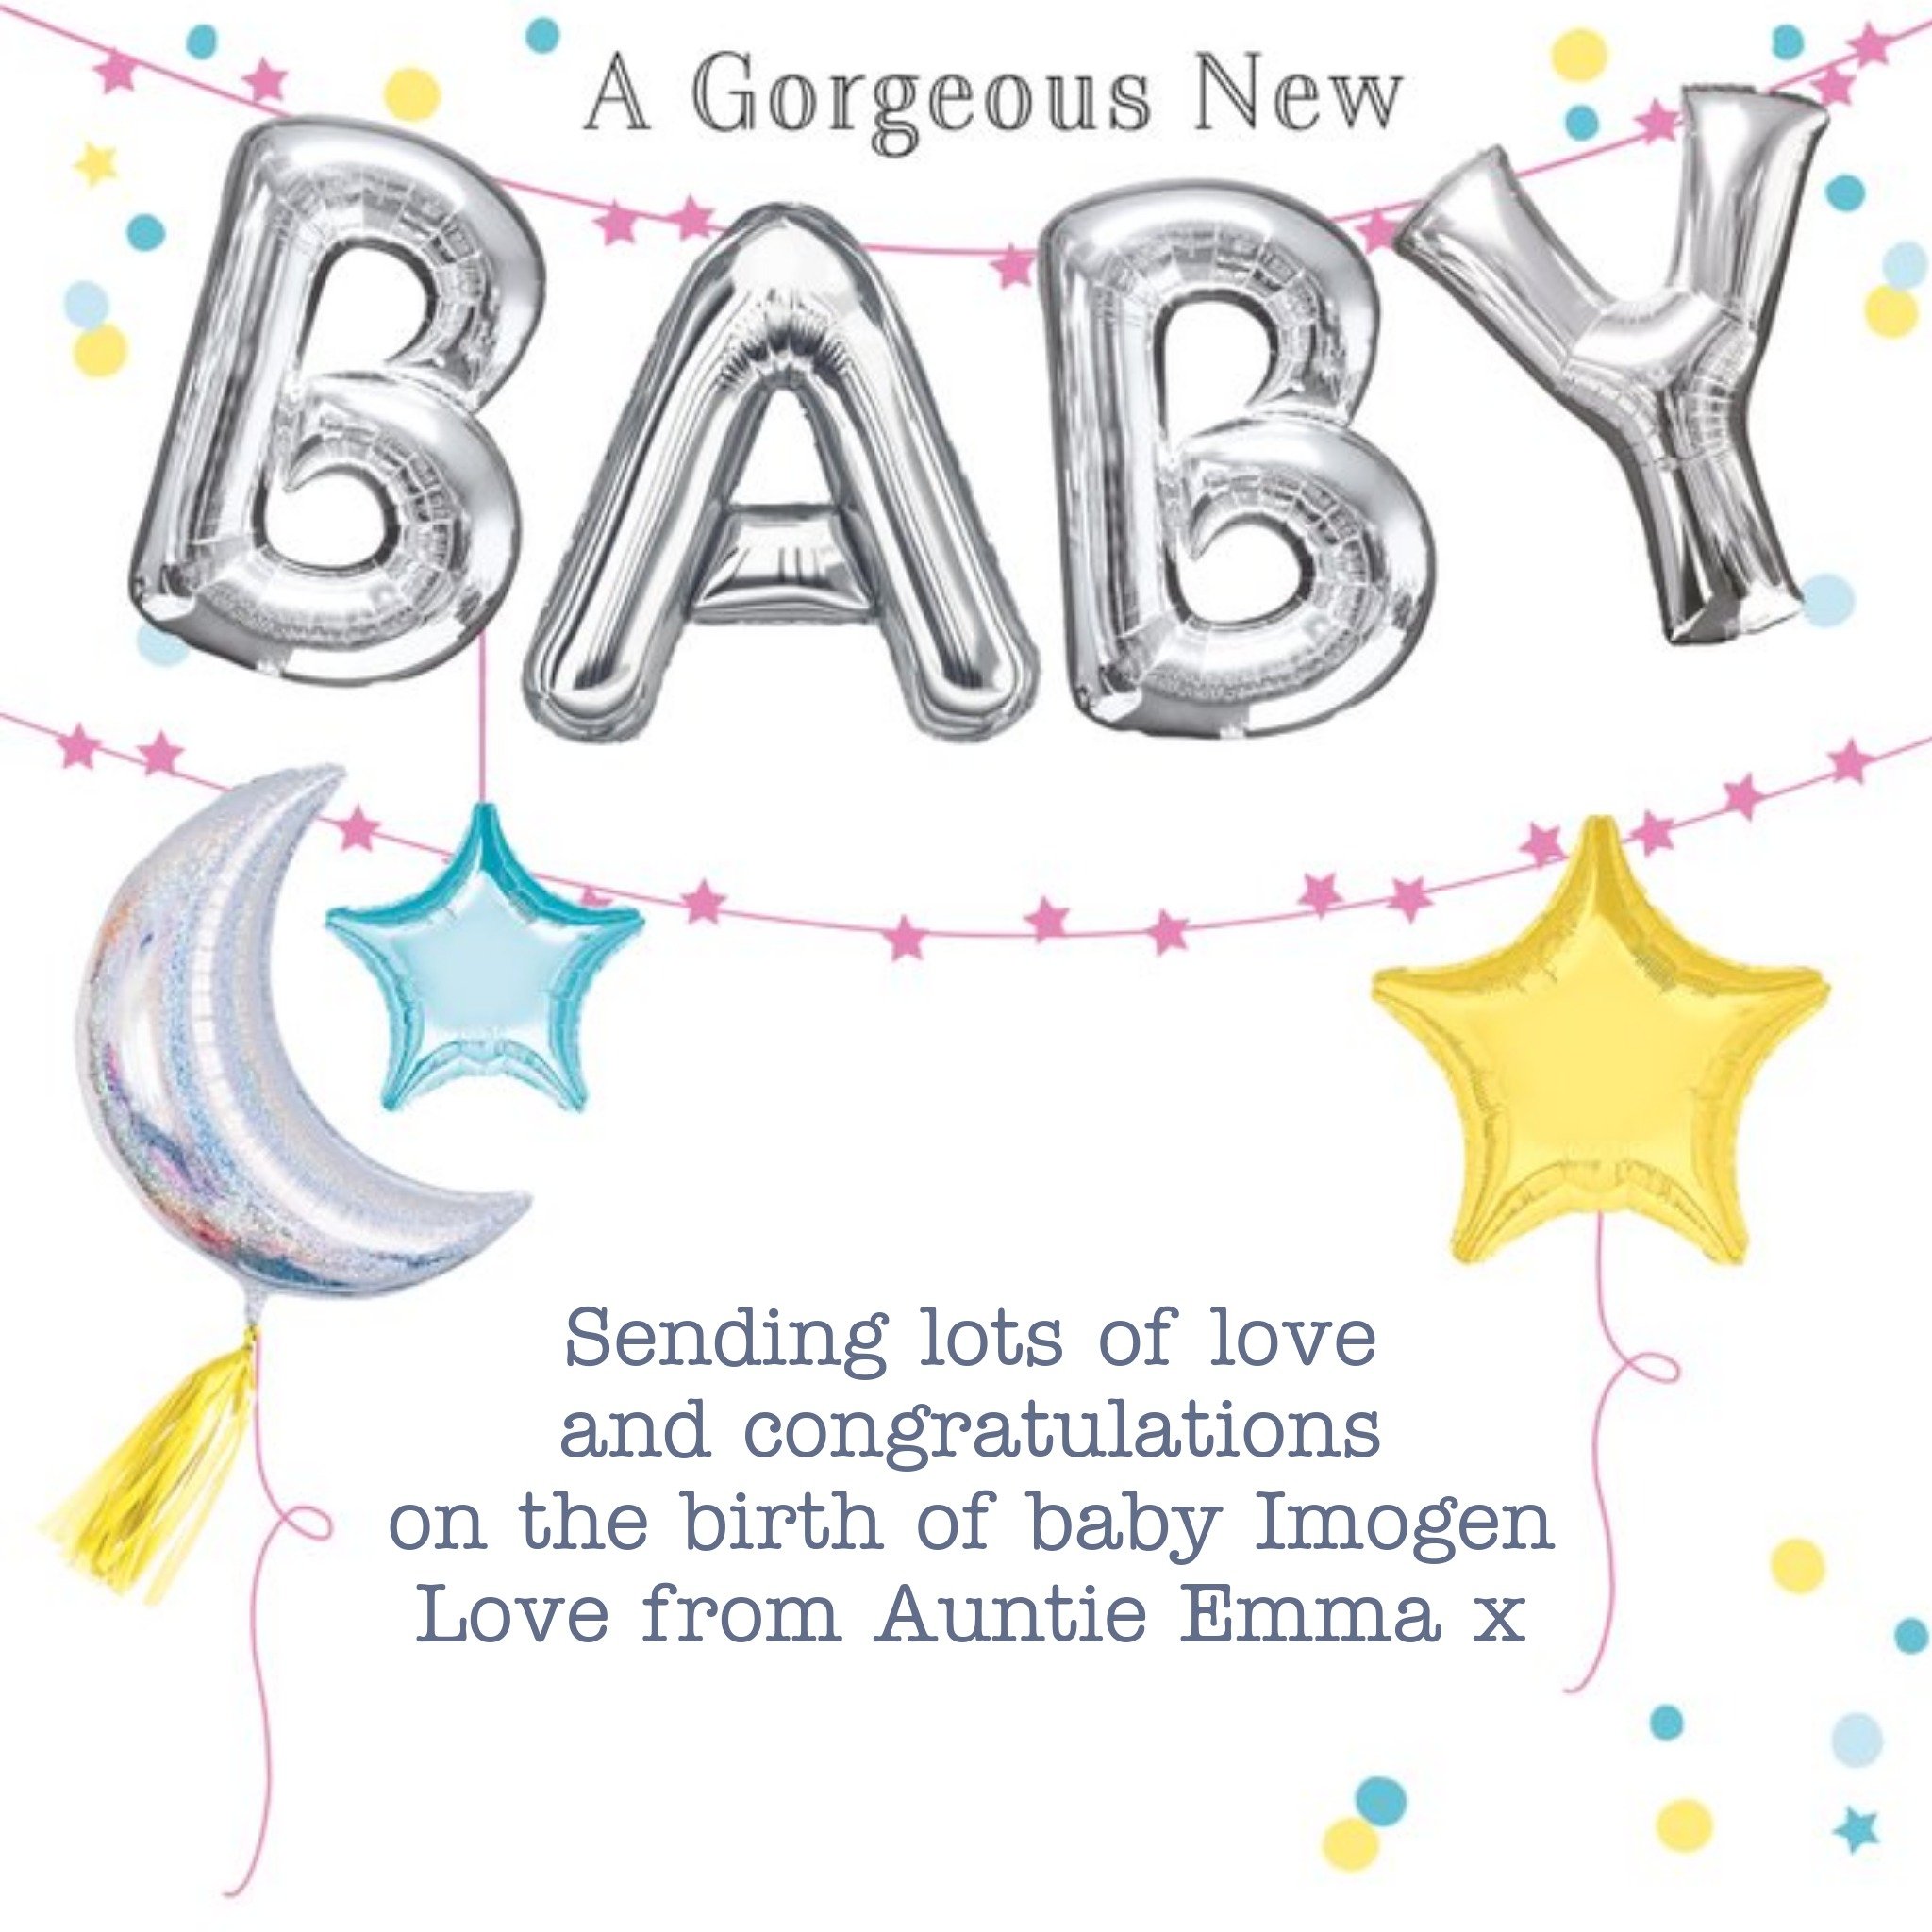 Moonpig Gorgeous New Baby Balloon Sentimental Verse Card, Square